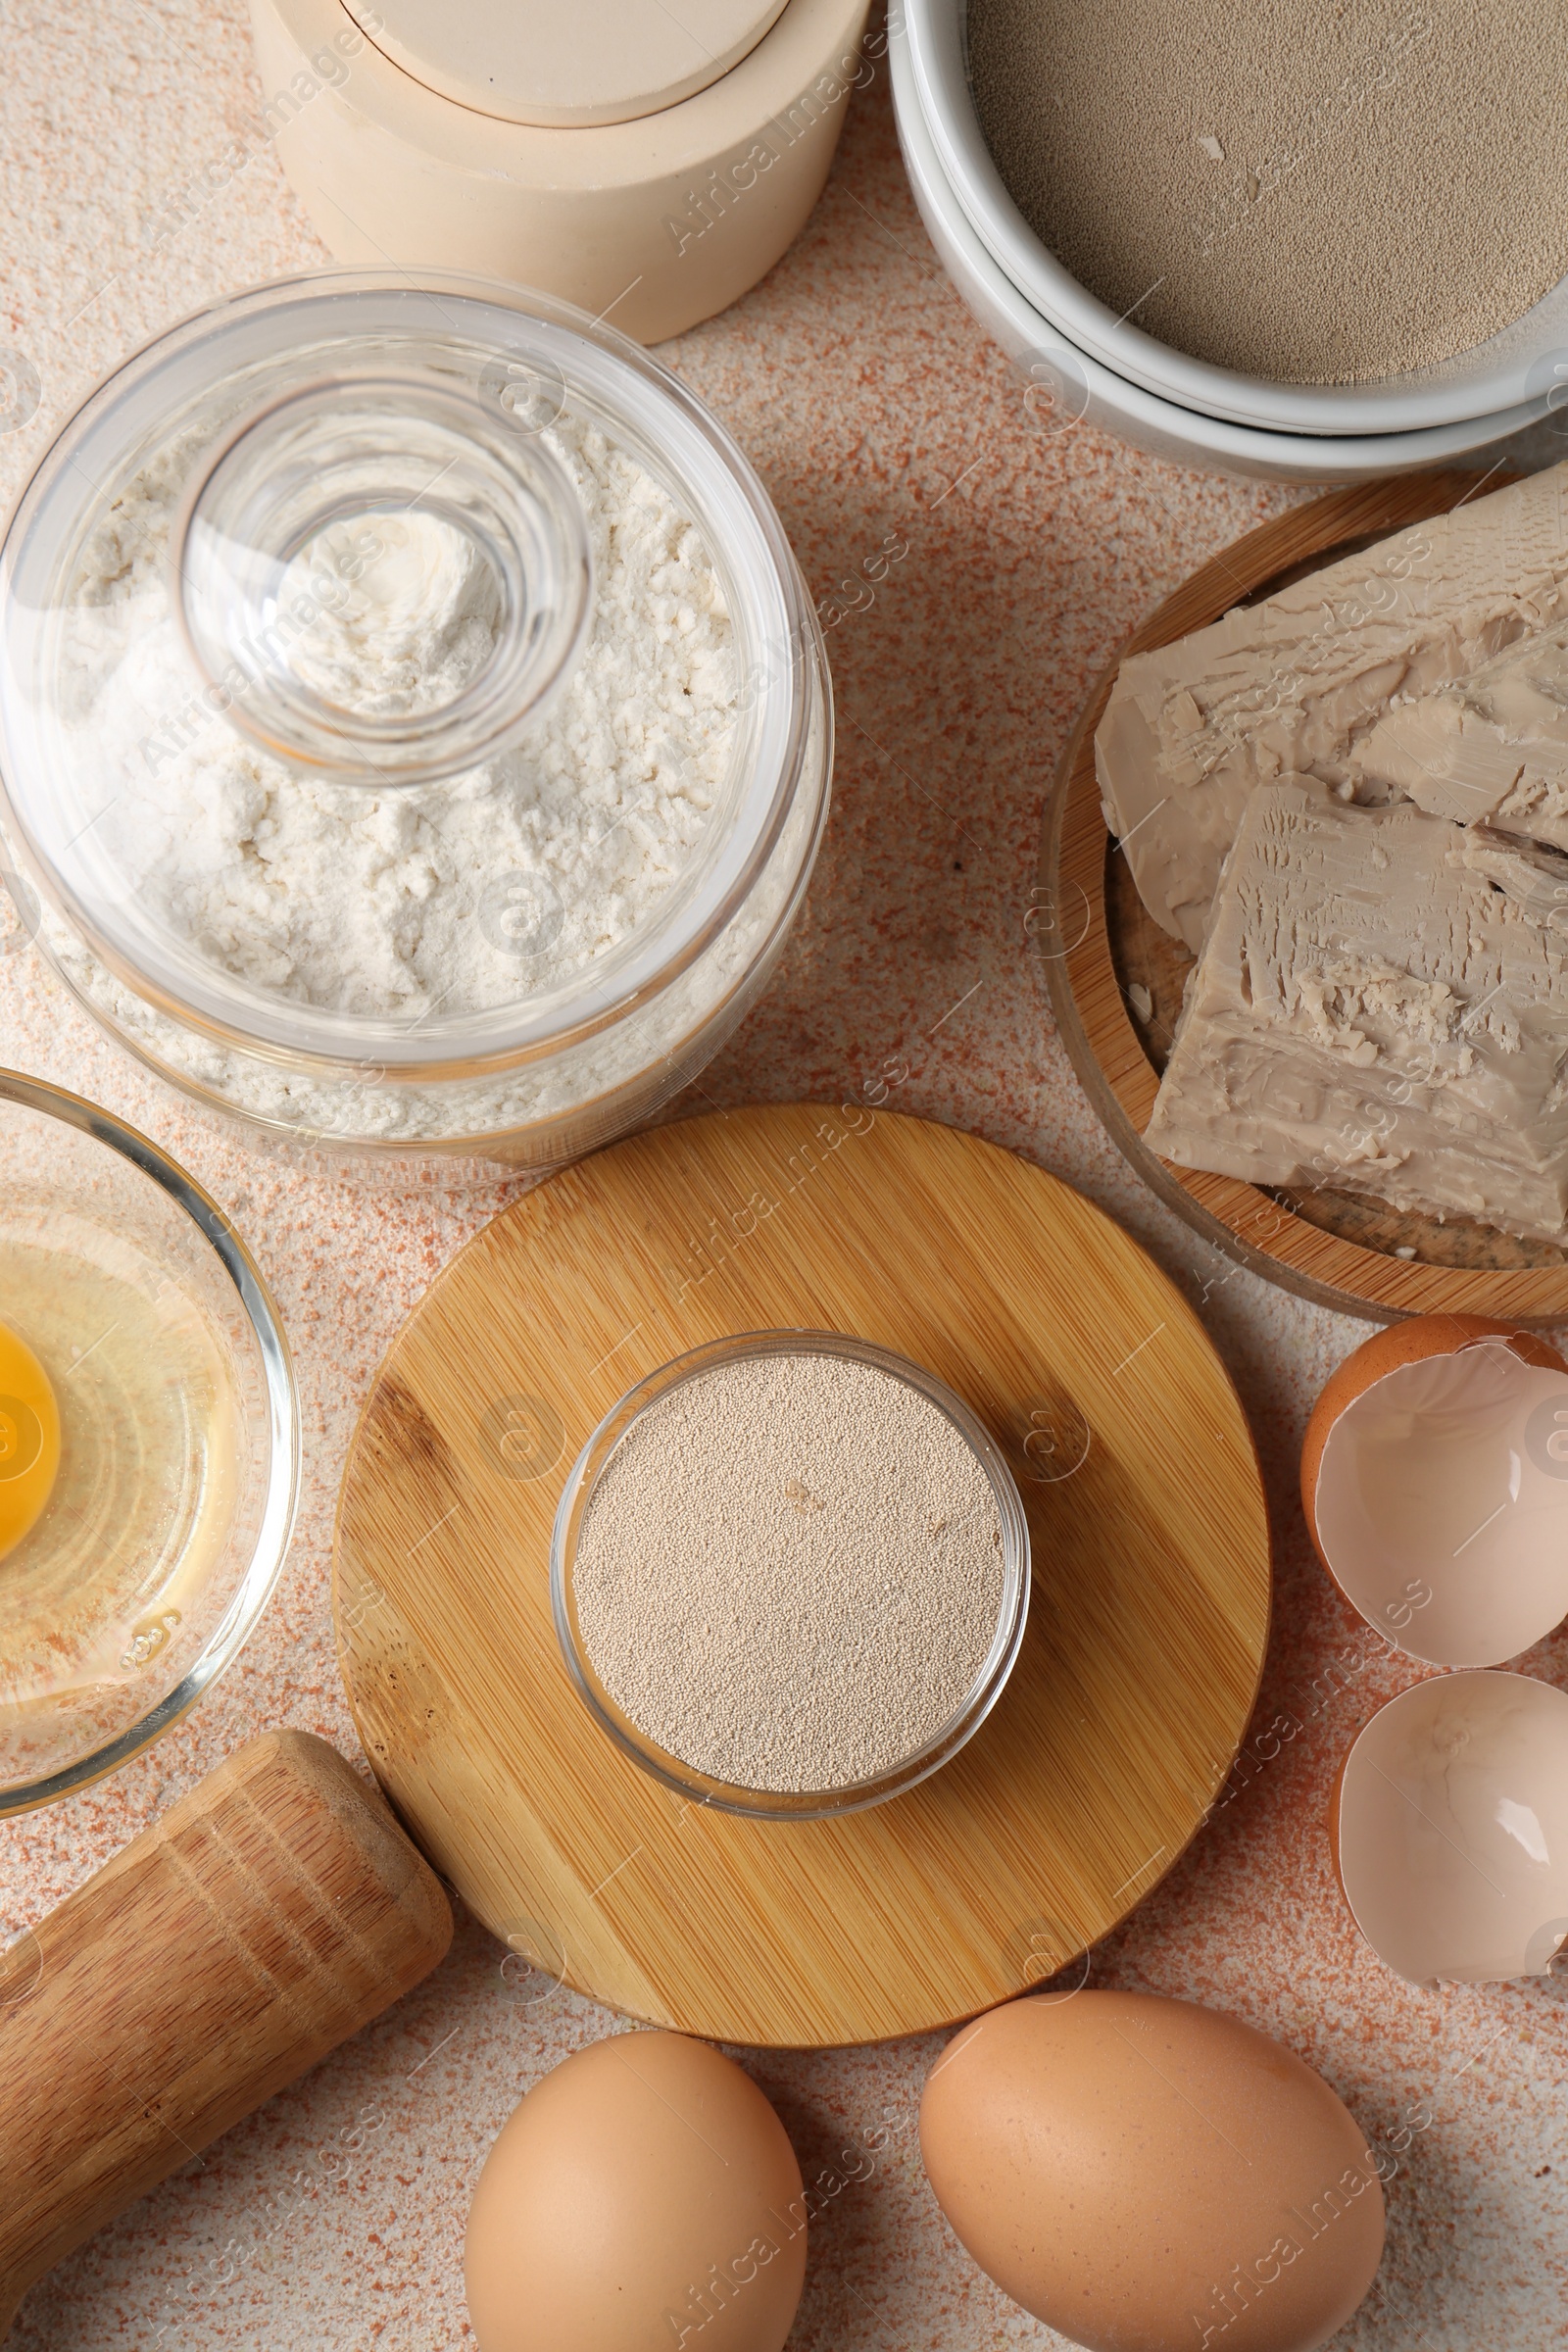 Photo of Different types of yeast, flour and eggs on orange textured table, flat lay